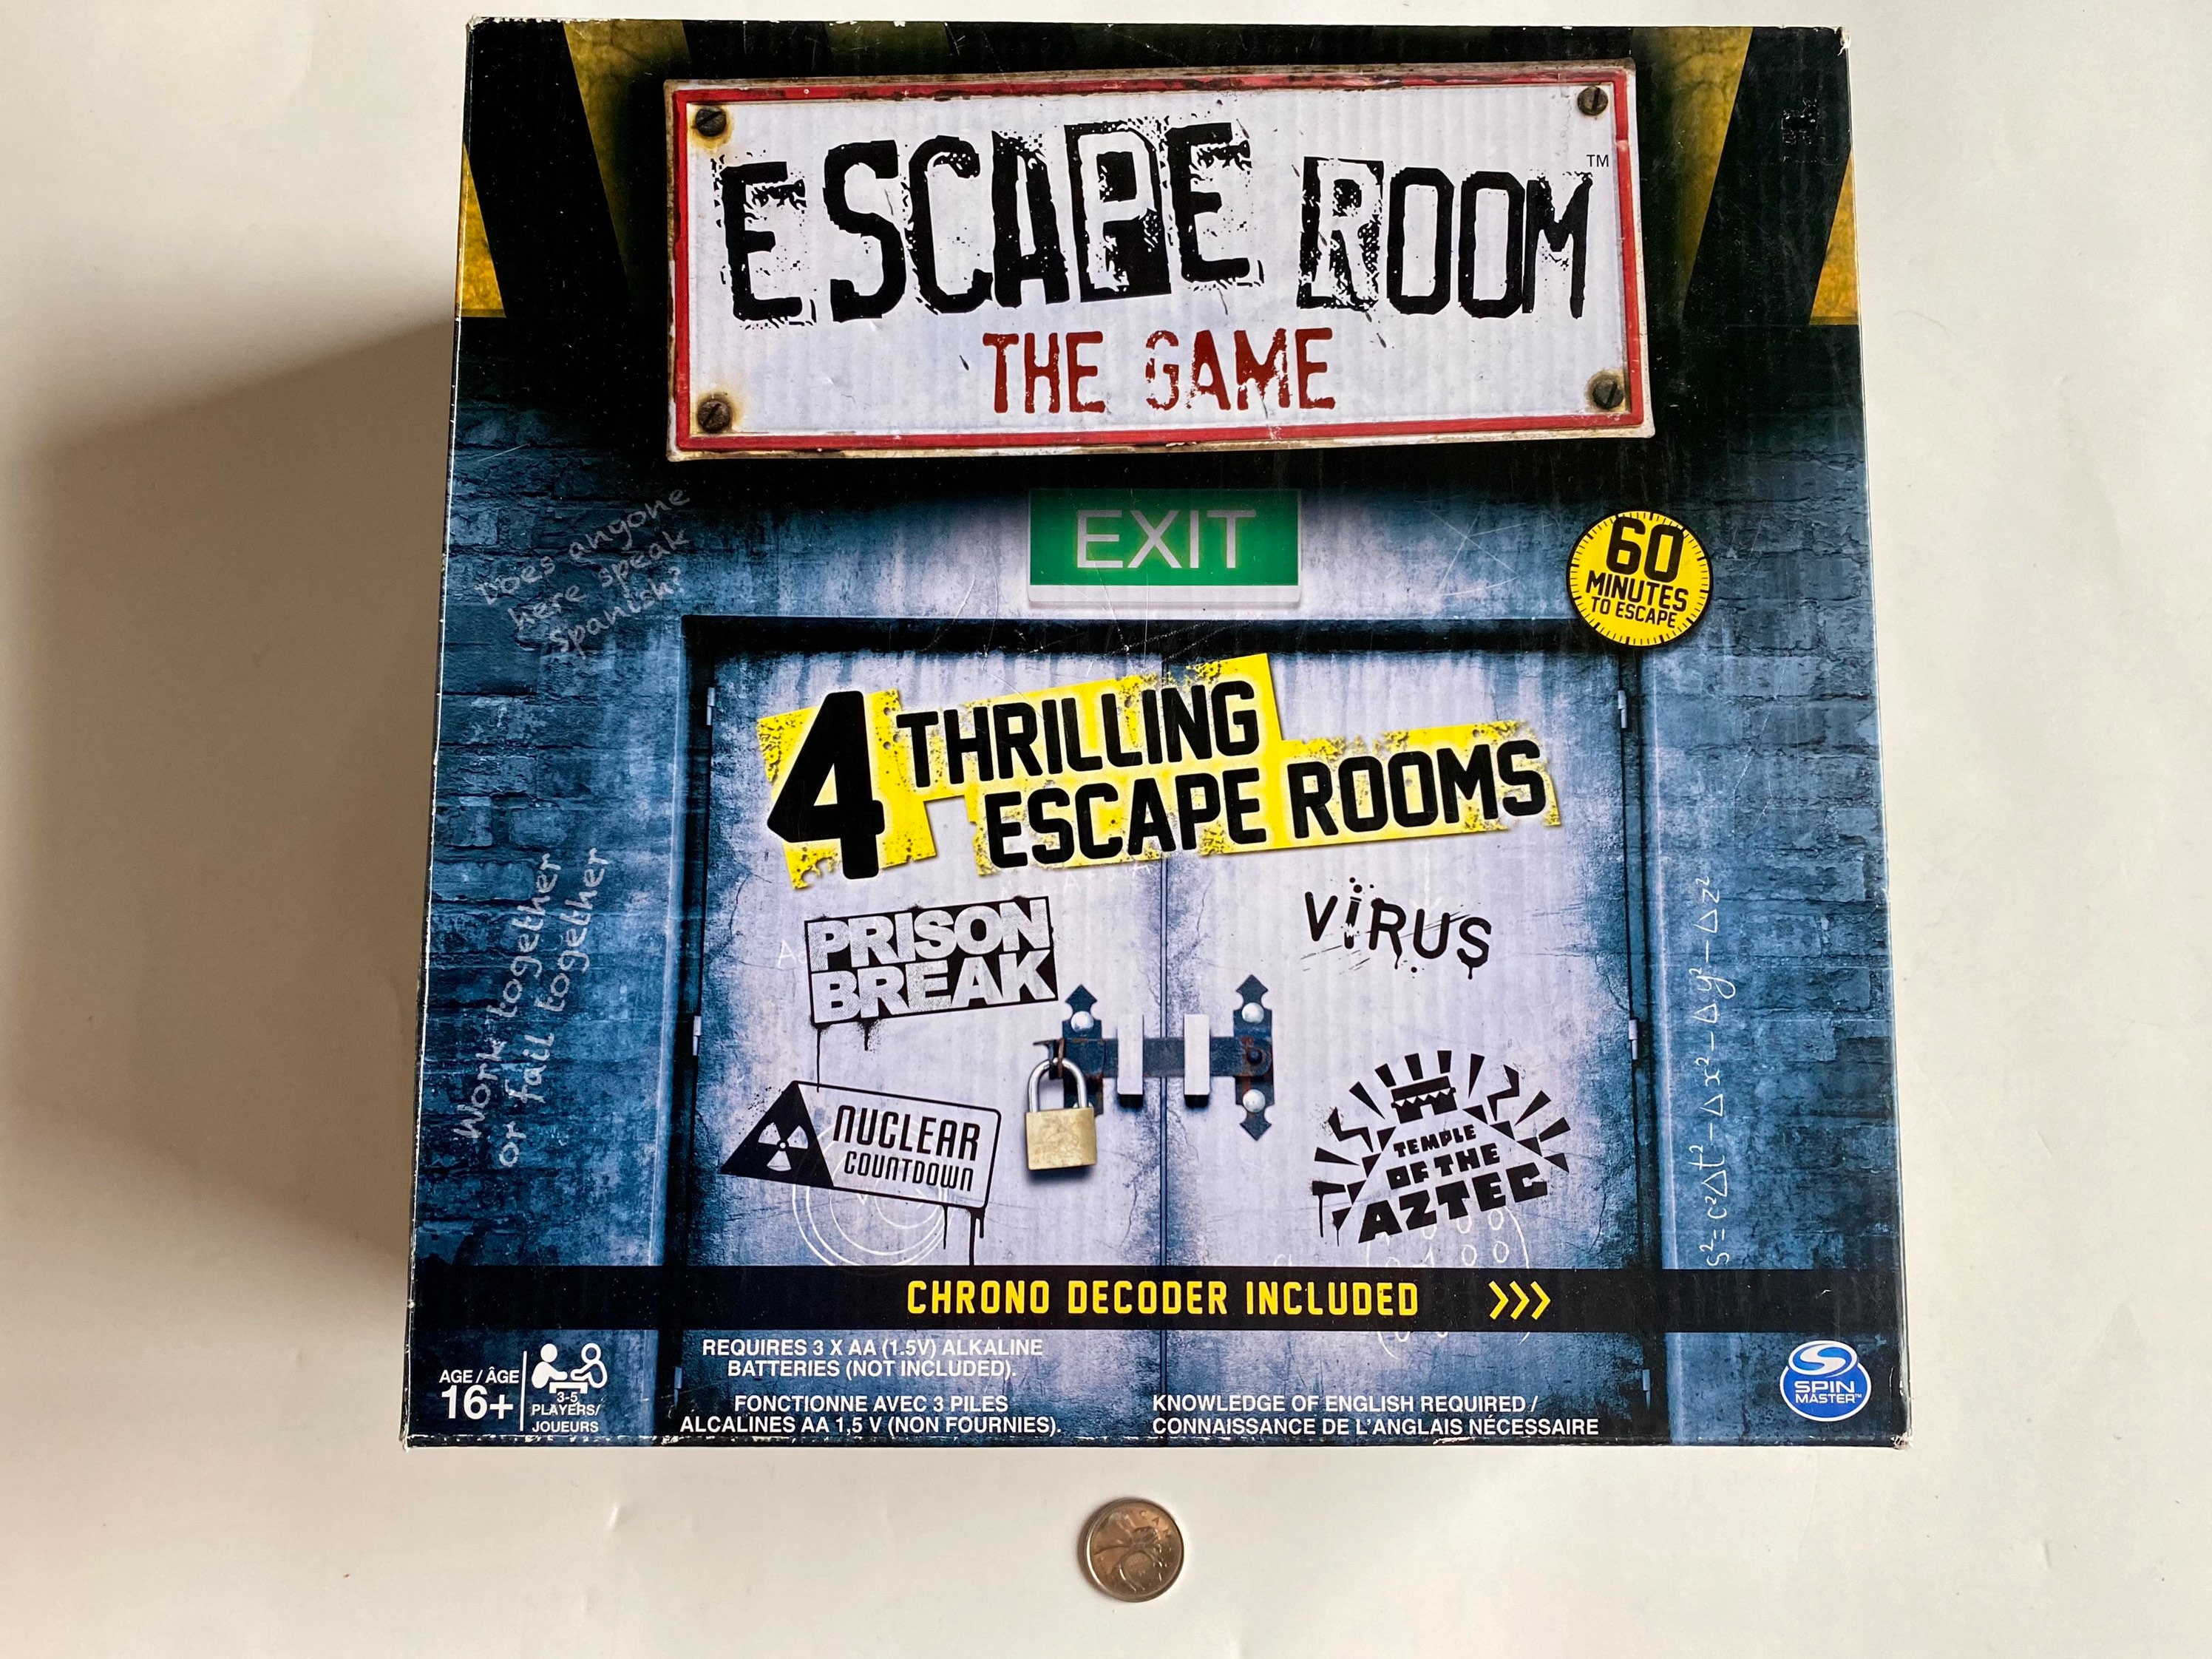 Thrilling & Exciting Exit Board Game